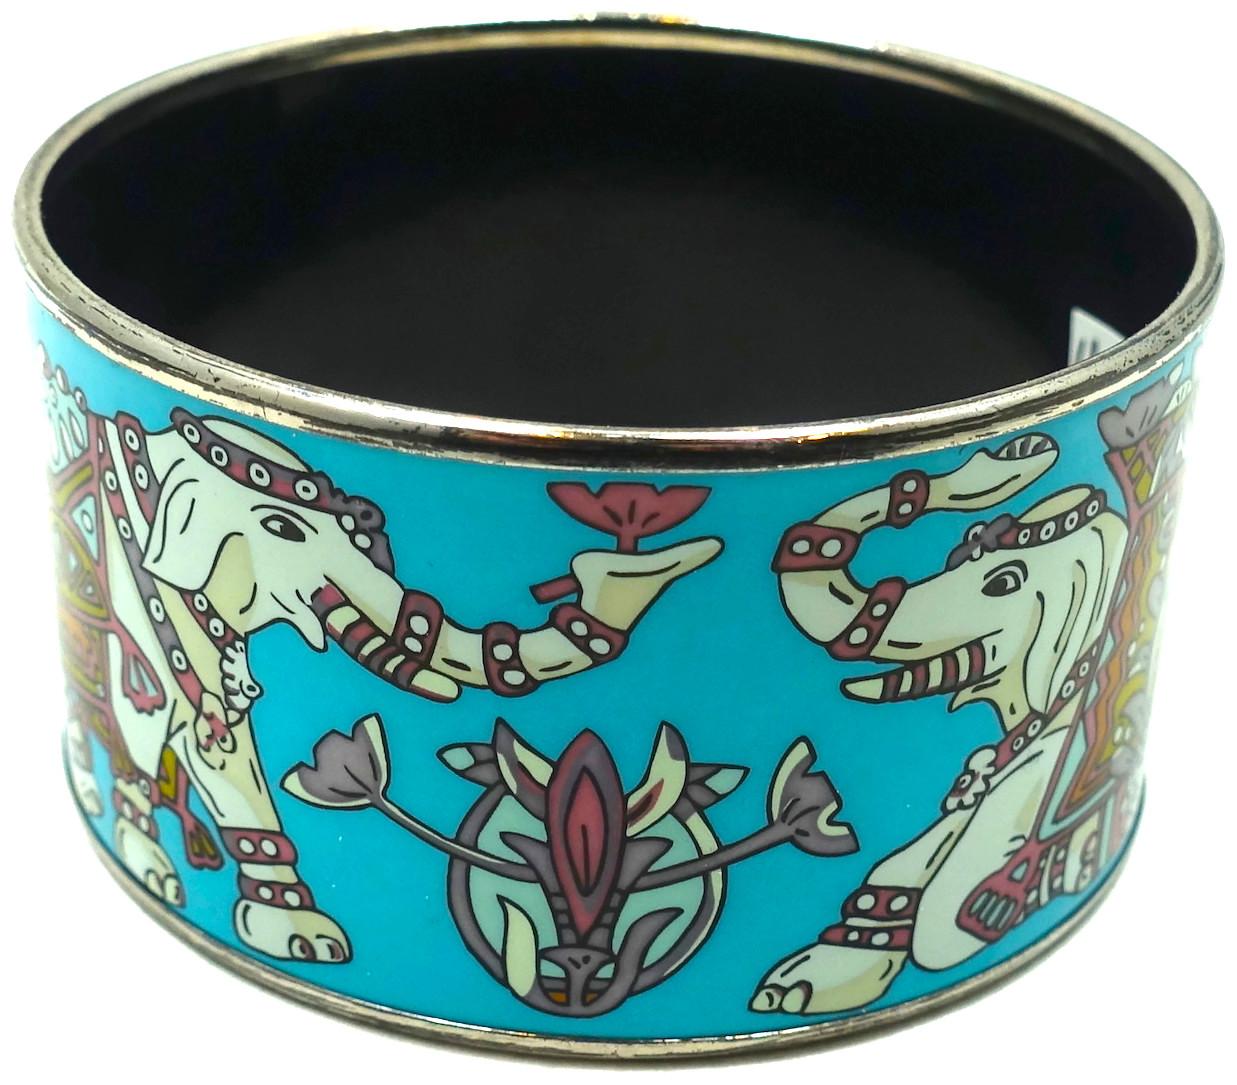 This famous wide vintage signed Hermes elephant cuff bracelet is in demand by collectors.  It has elephants with their trunks up going around the cuff. It has multi-color enameling with a silver tone trim.  In excellent condition, this bracelet